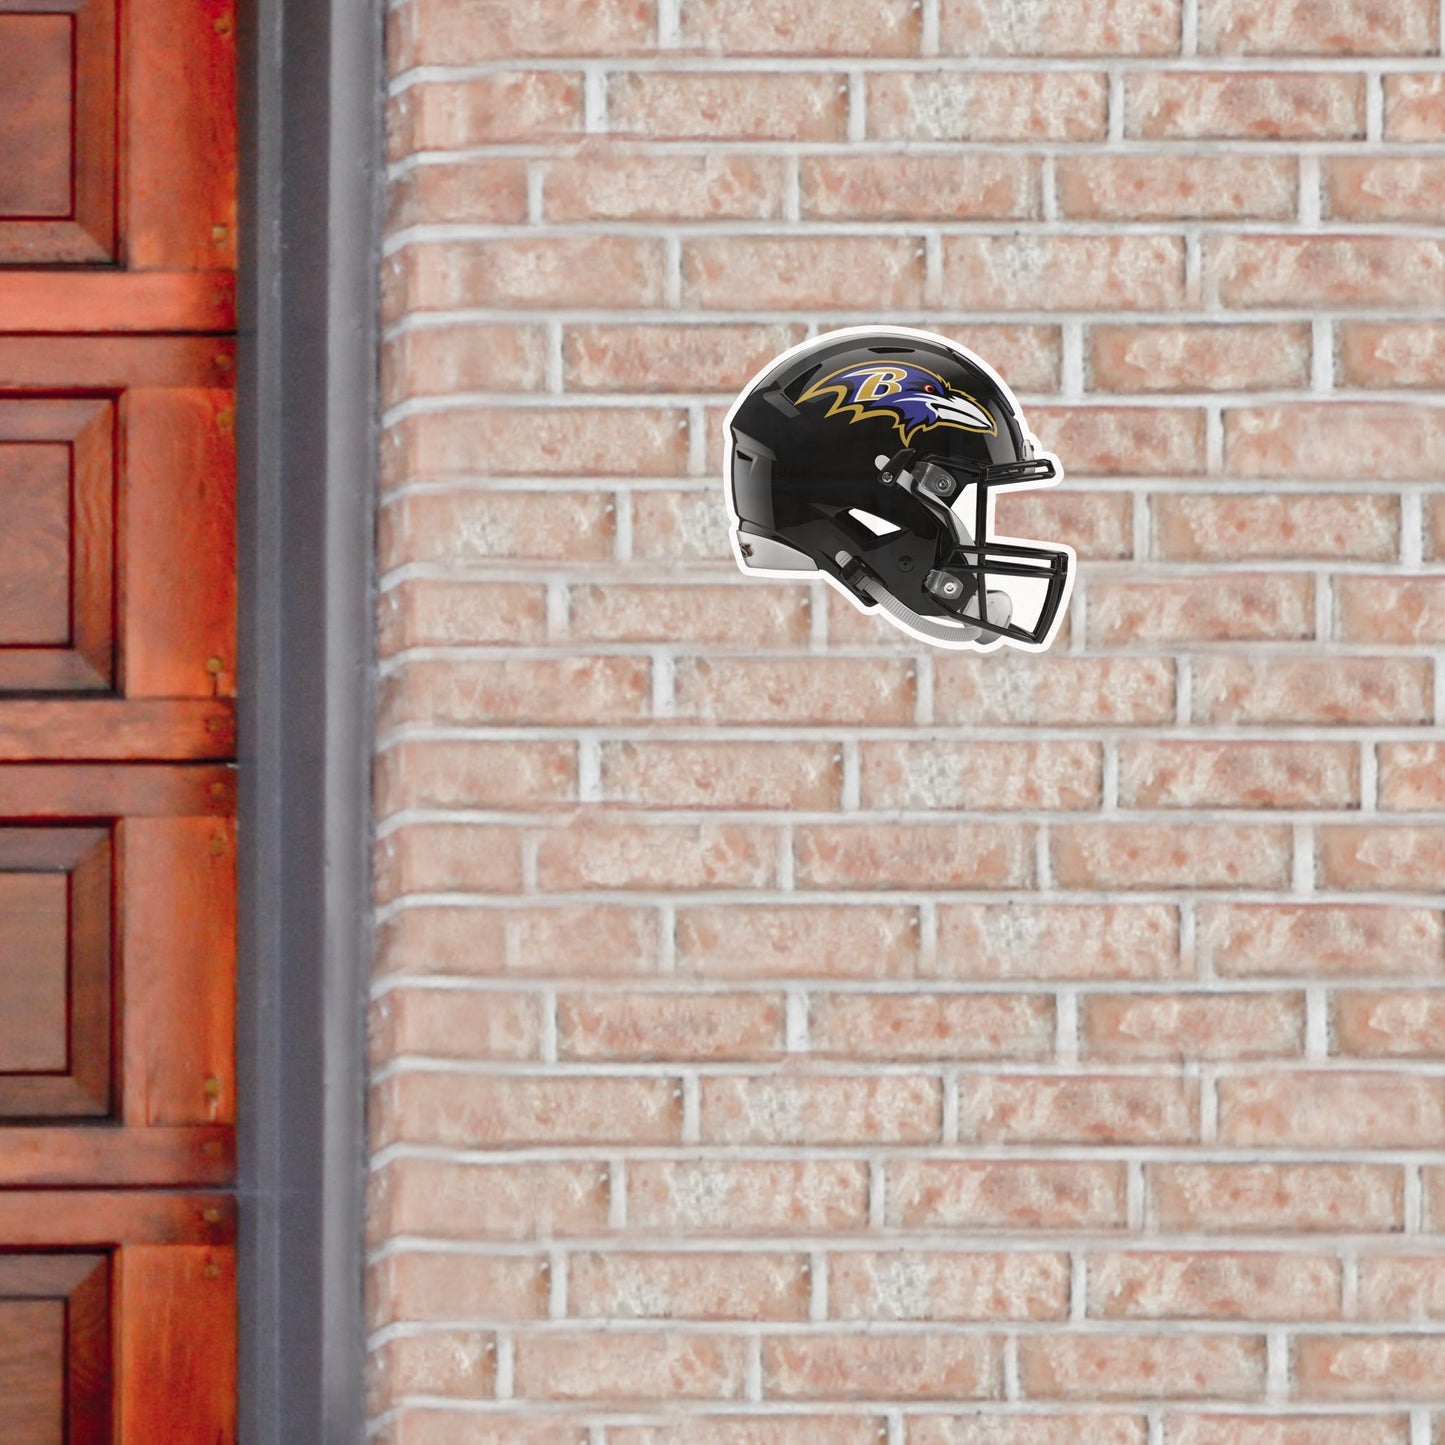 Baltimore Ravens: Outdoor Helmet - Officially Licensed NFL Outdoor Graphic